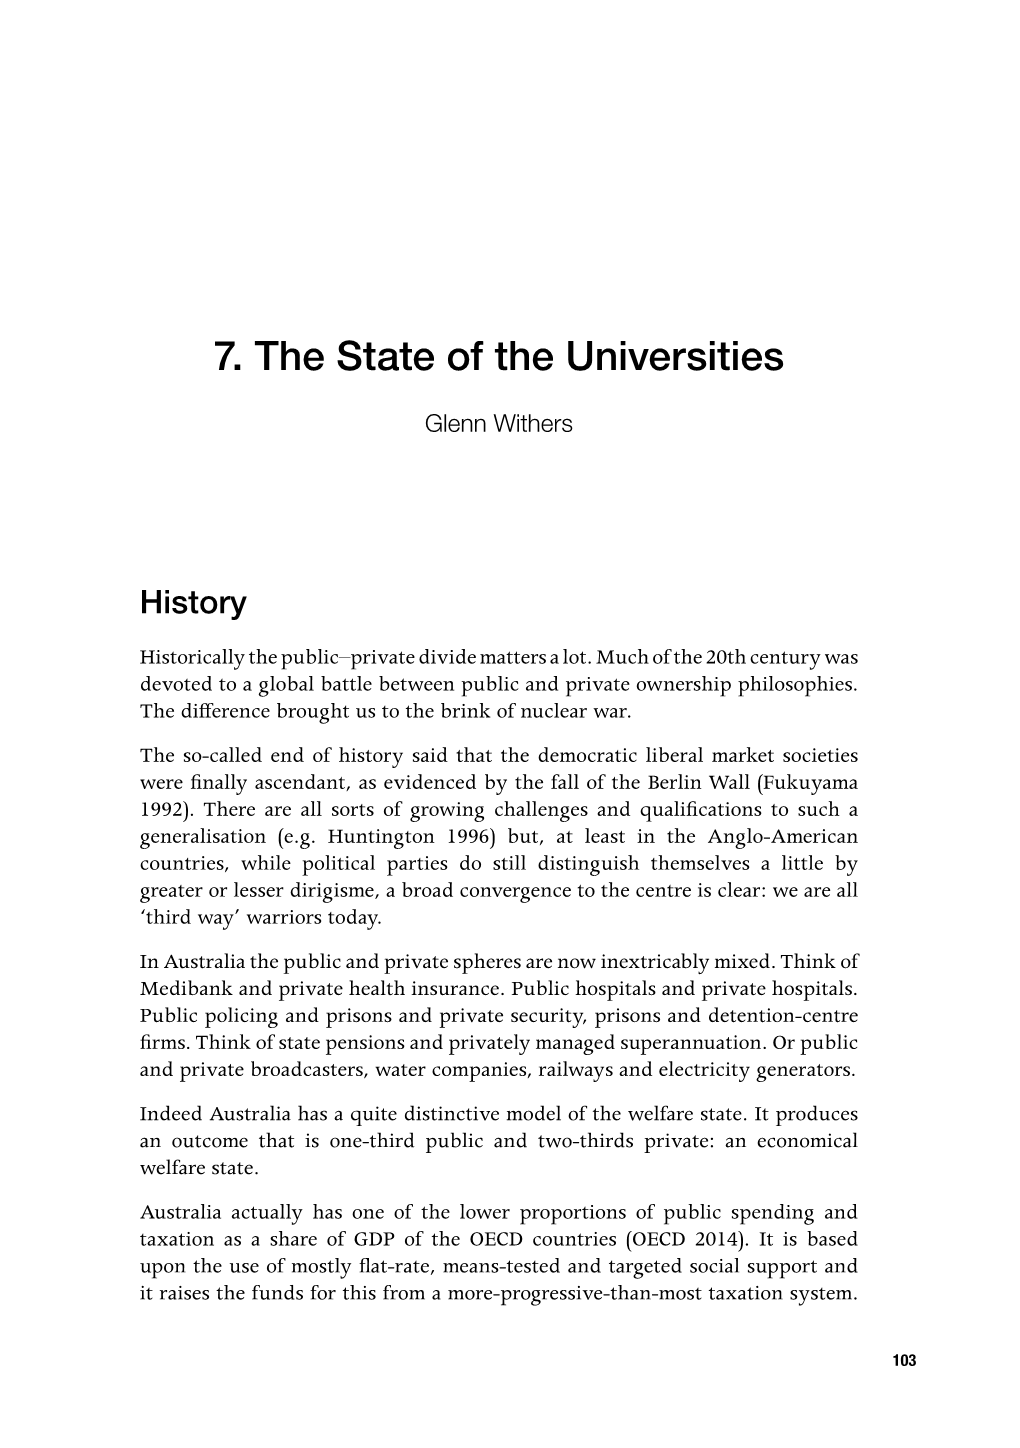 7. the State of the Universities